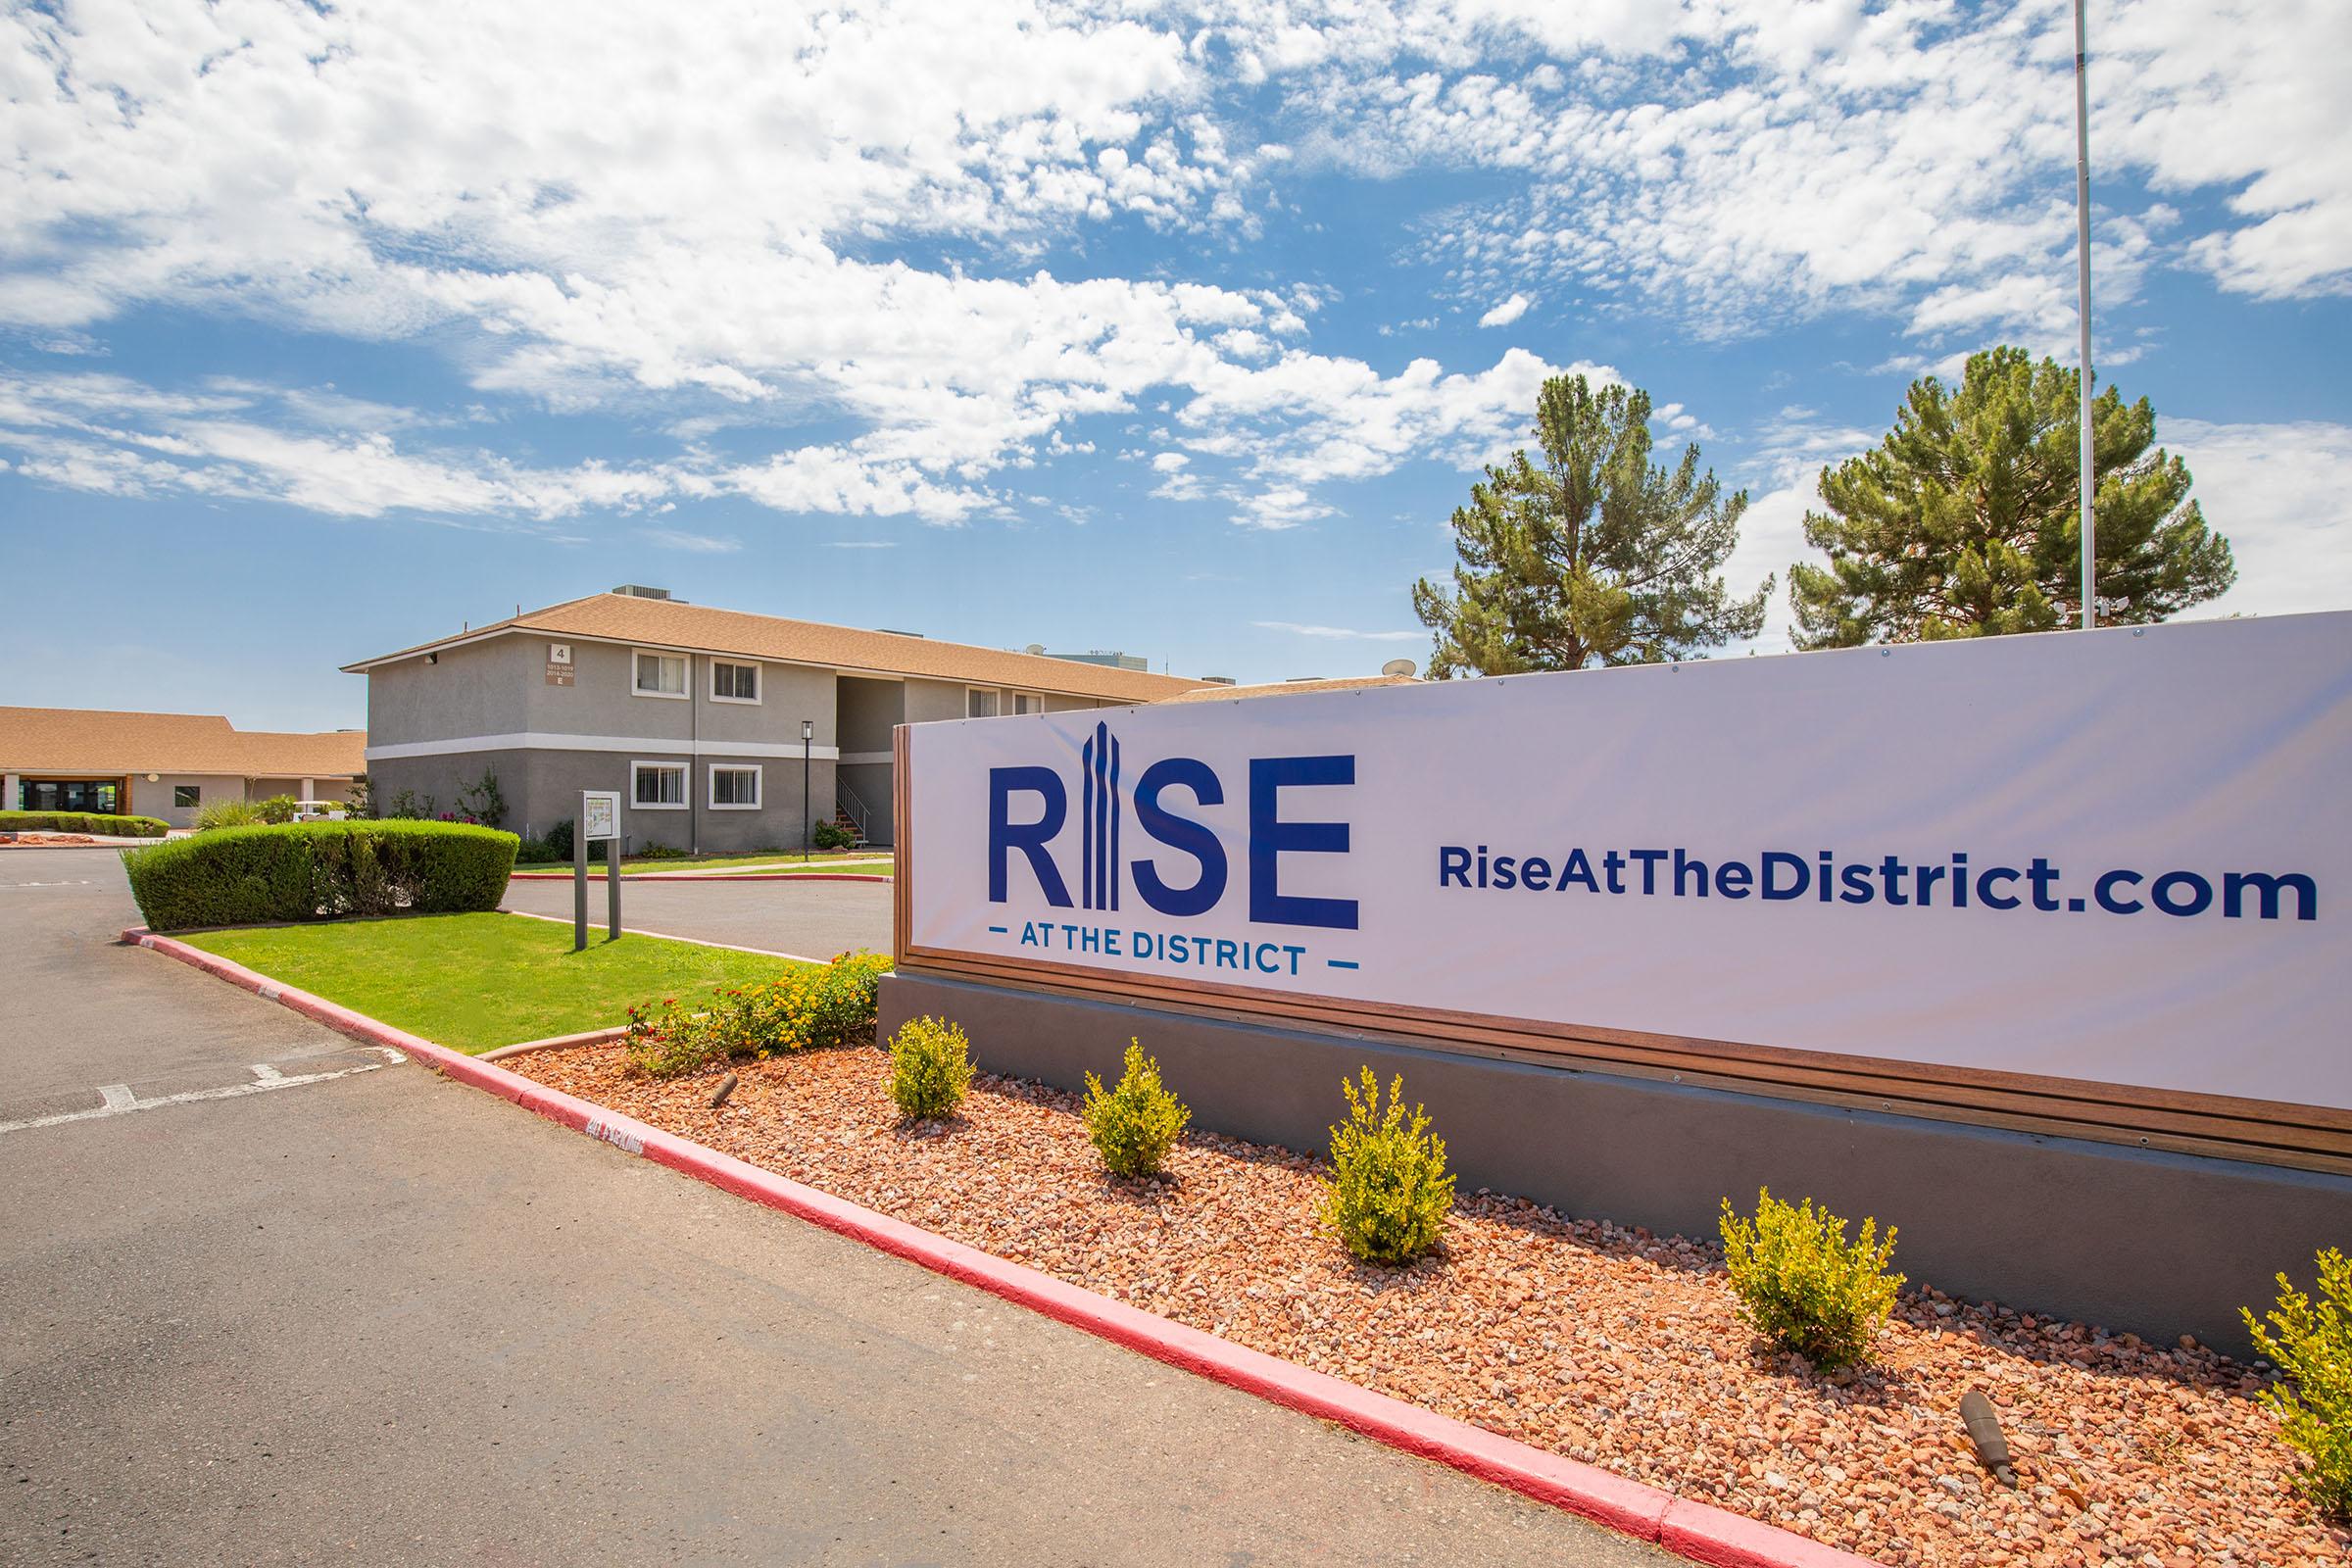 Outdoor Rise at The District welcome sign in front of Mesa, AZ apartment buildings